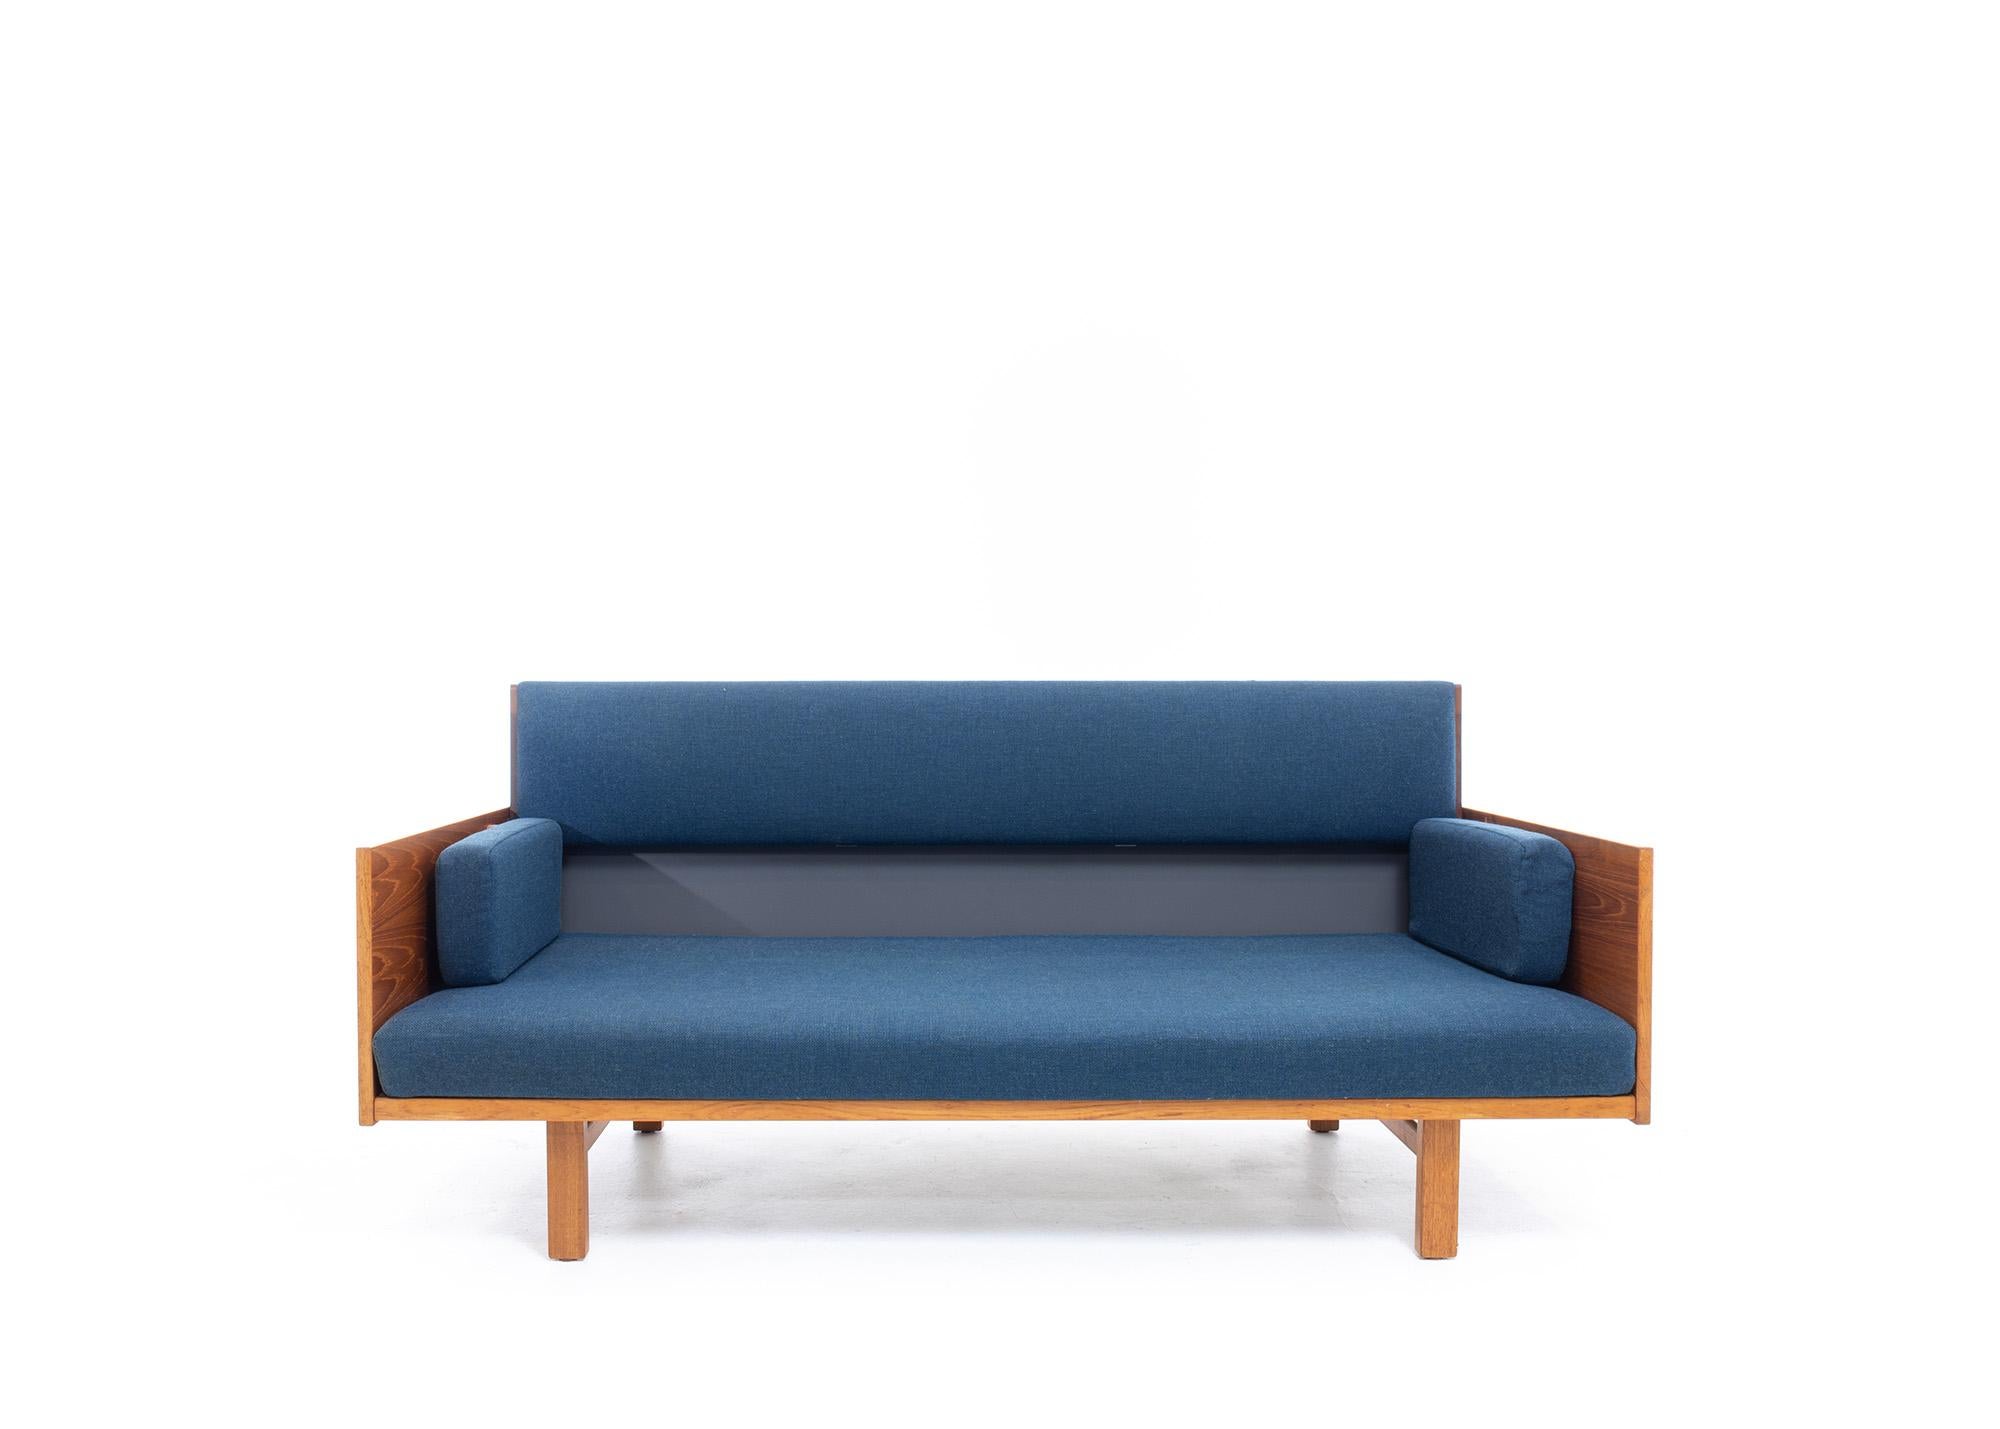 Introducing the Teak GE-259 Adjustable Daybed/Sofa by Hans Wegner for GETAMA, a stunning Mid-Century Modern piece of furniture that combines style and versatility.

Crafted from the finest teak wood, this Mid-Century Modern daybed/sofa boasts a